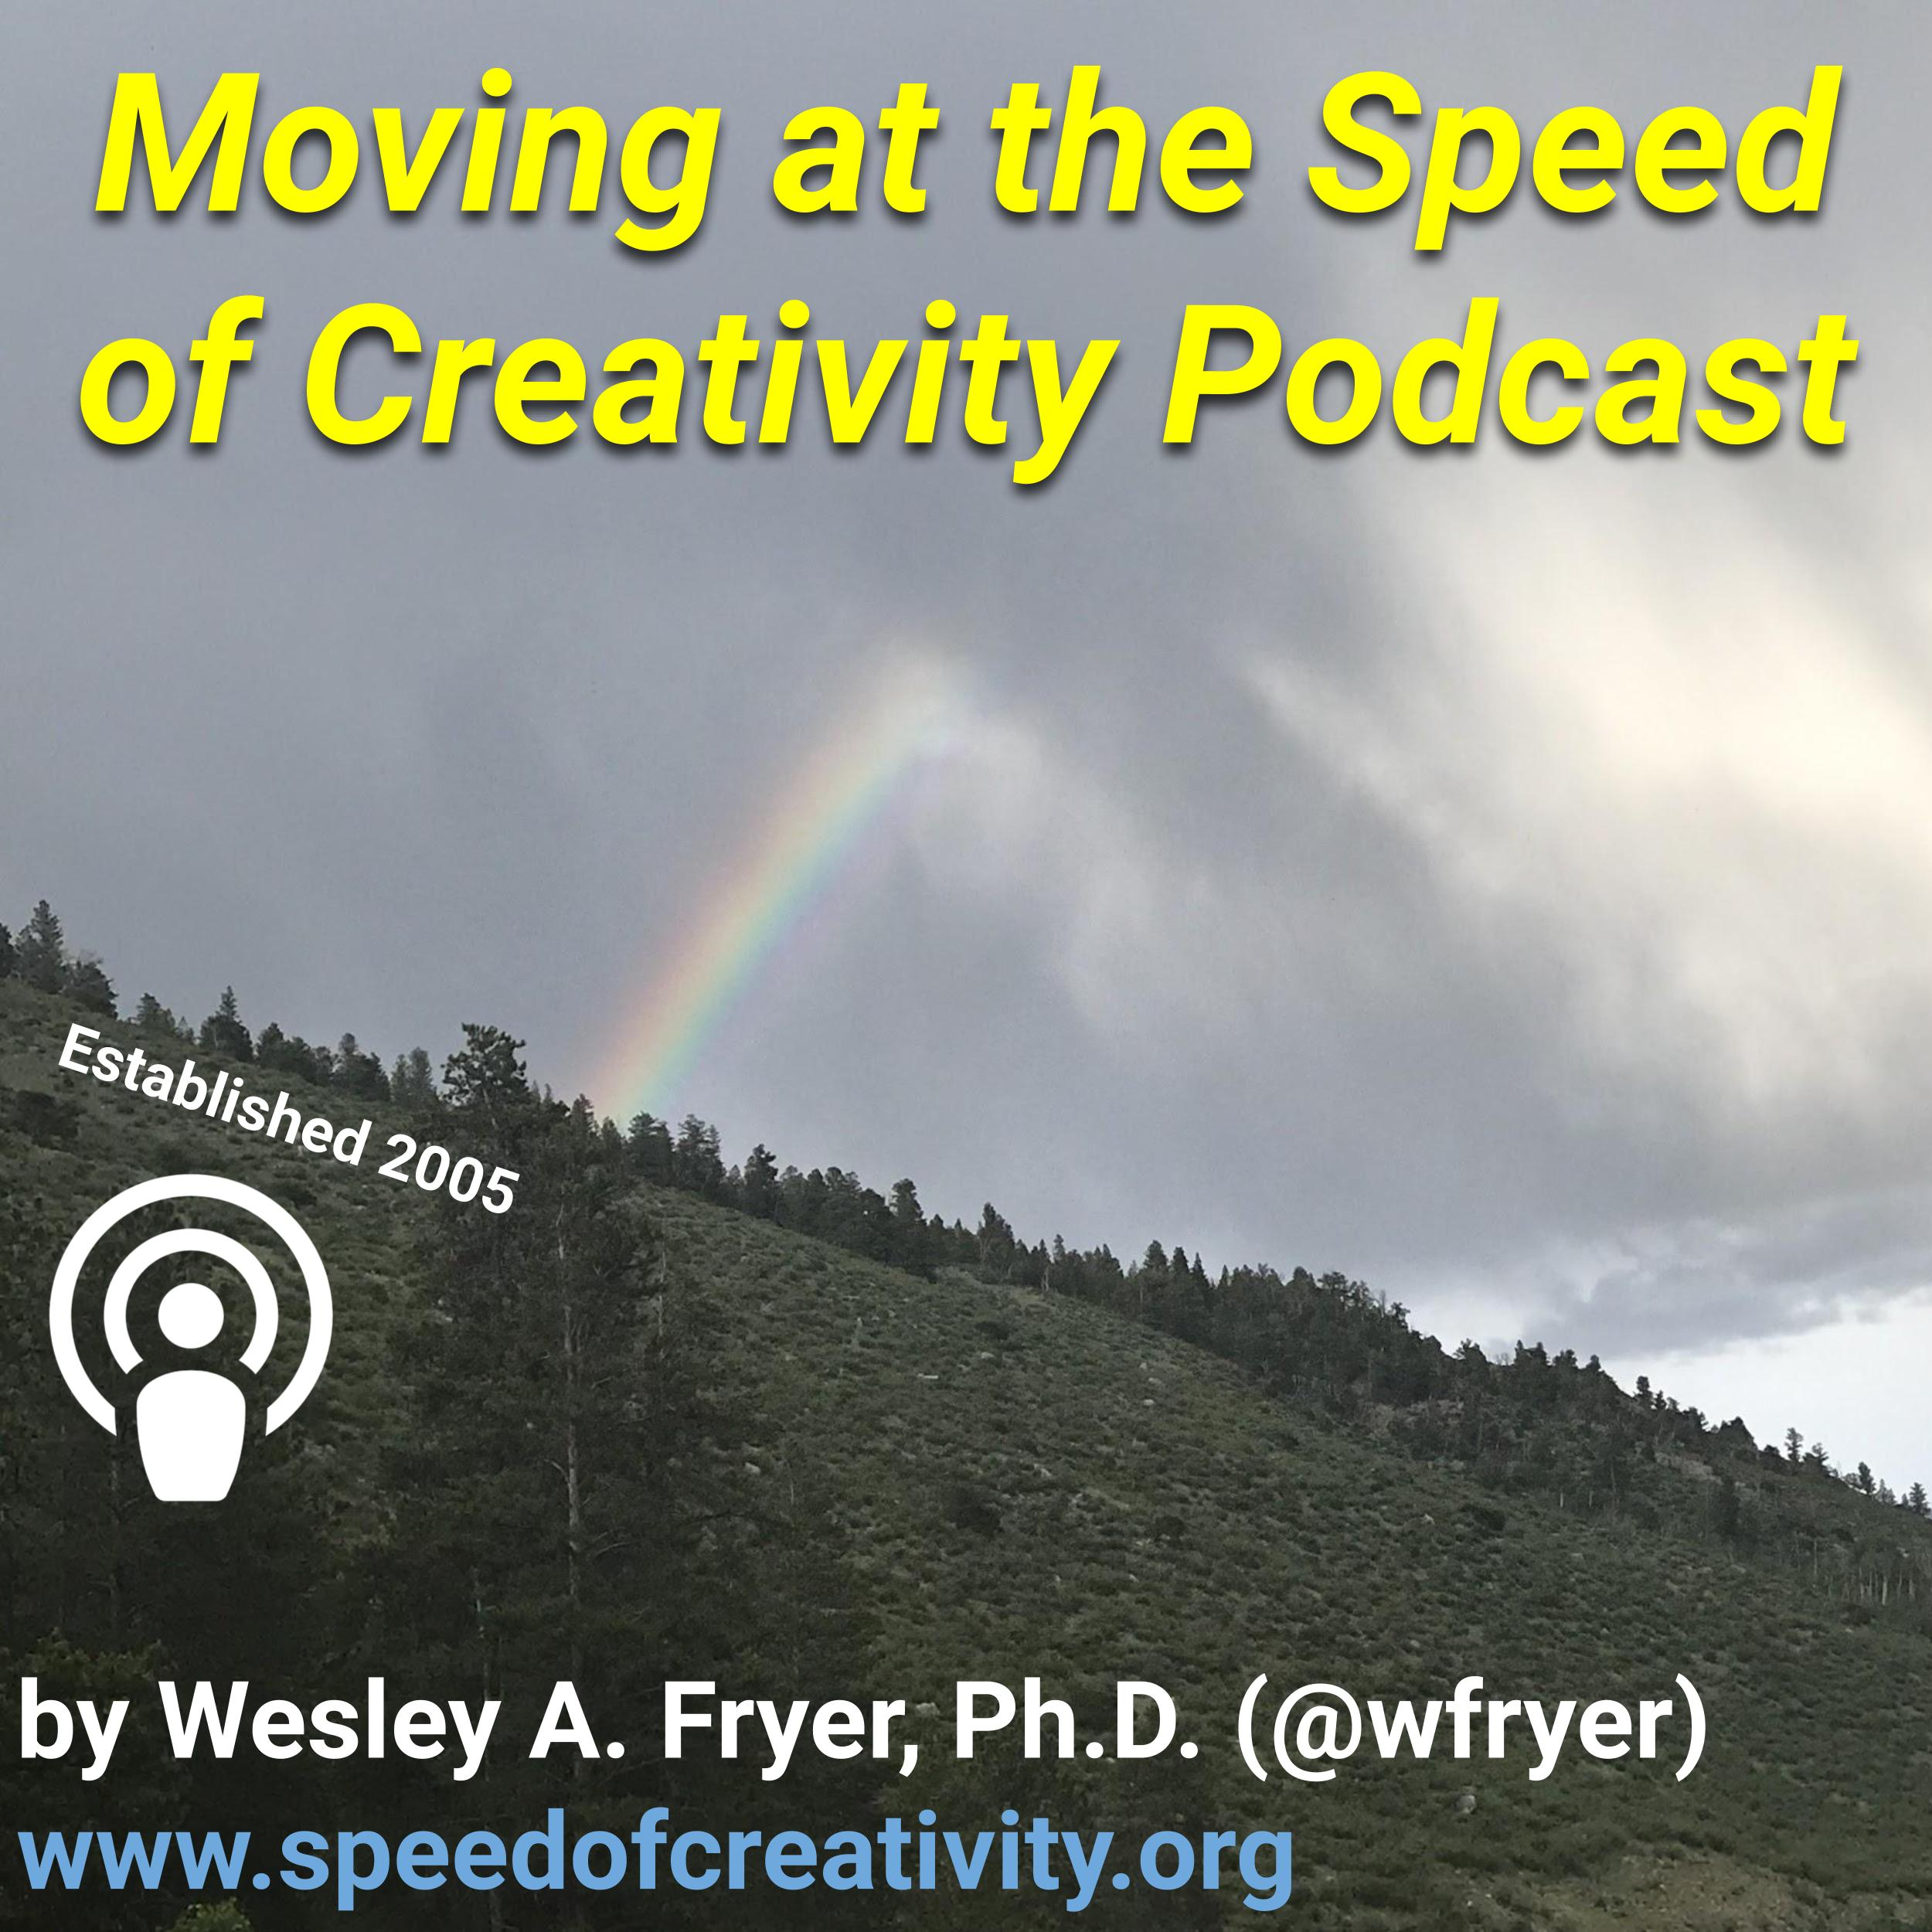 Moving at the Speed of Creativity Podcasts